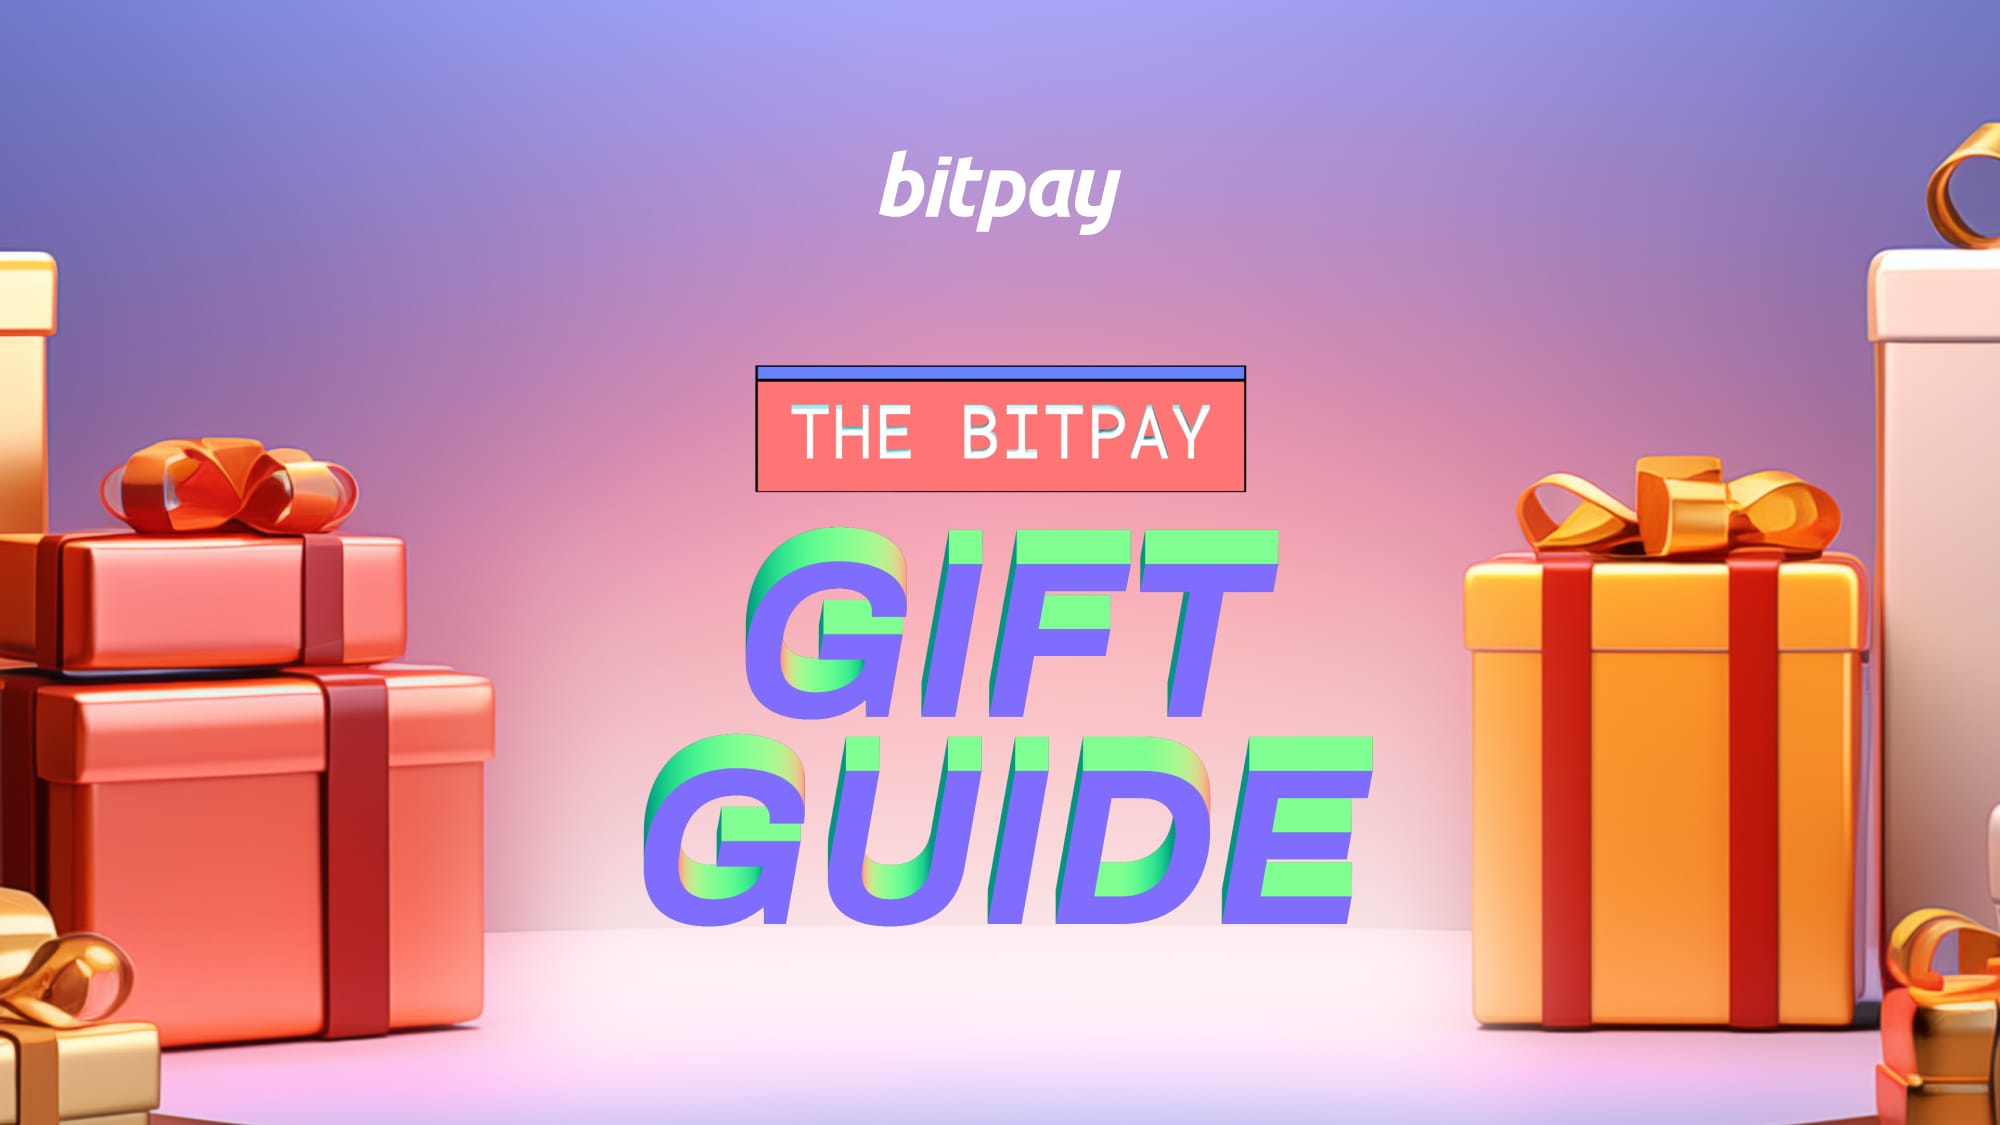 BitPay’s Crypto Gift Guide - All the Gifts You Can Buy with Crypto